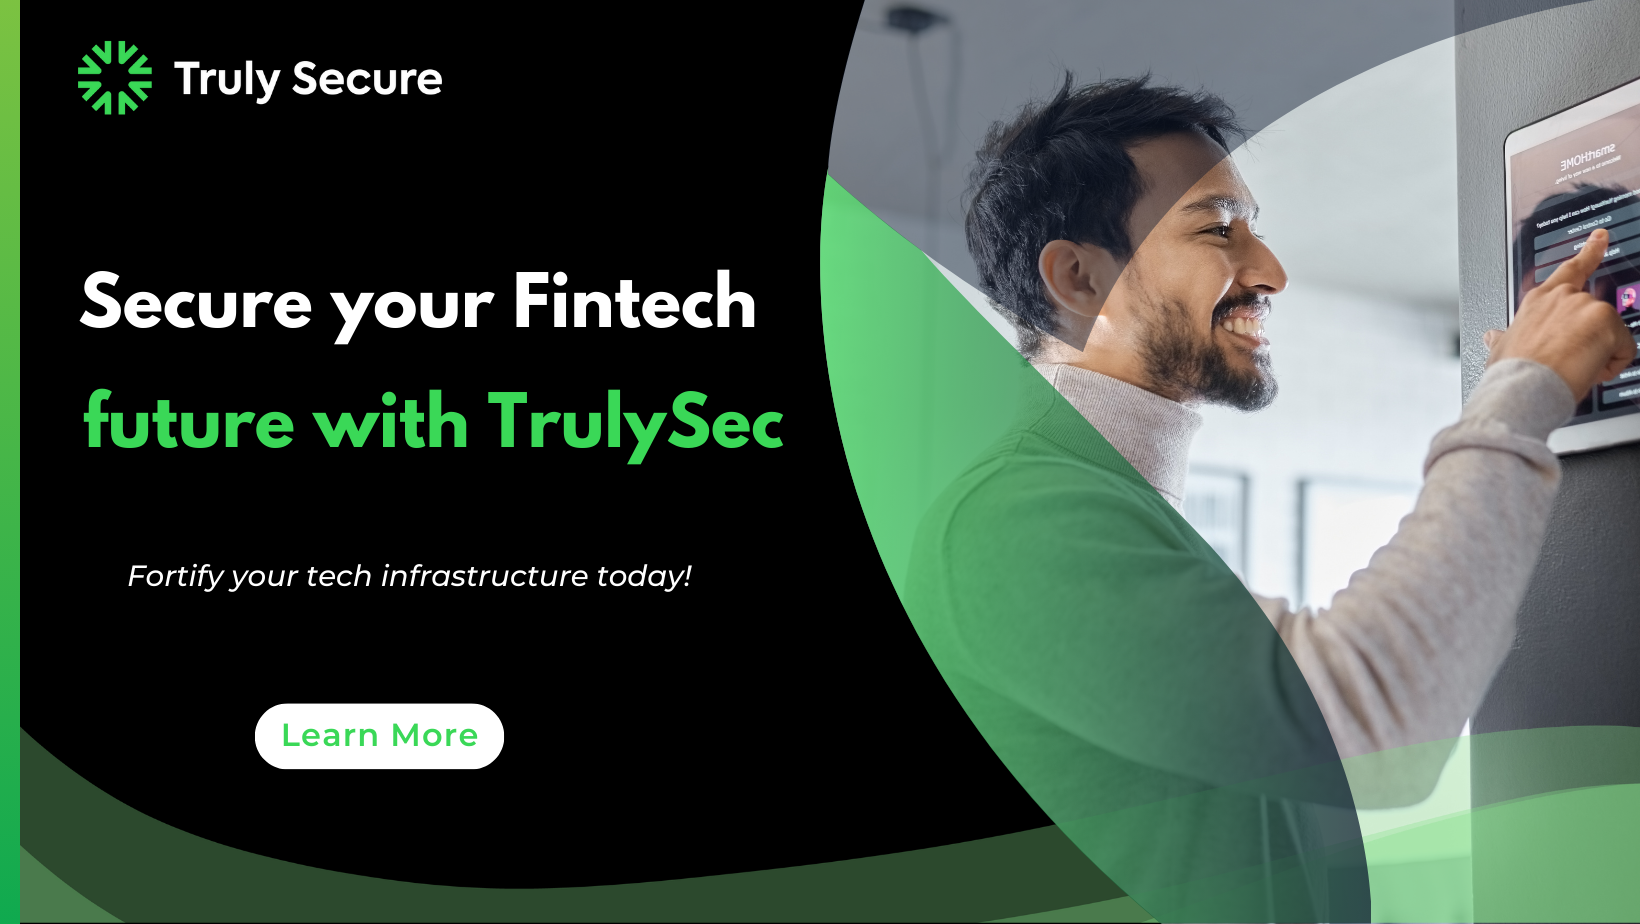 Secure Your Fintech with Truly Secure